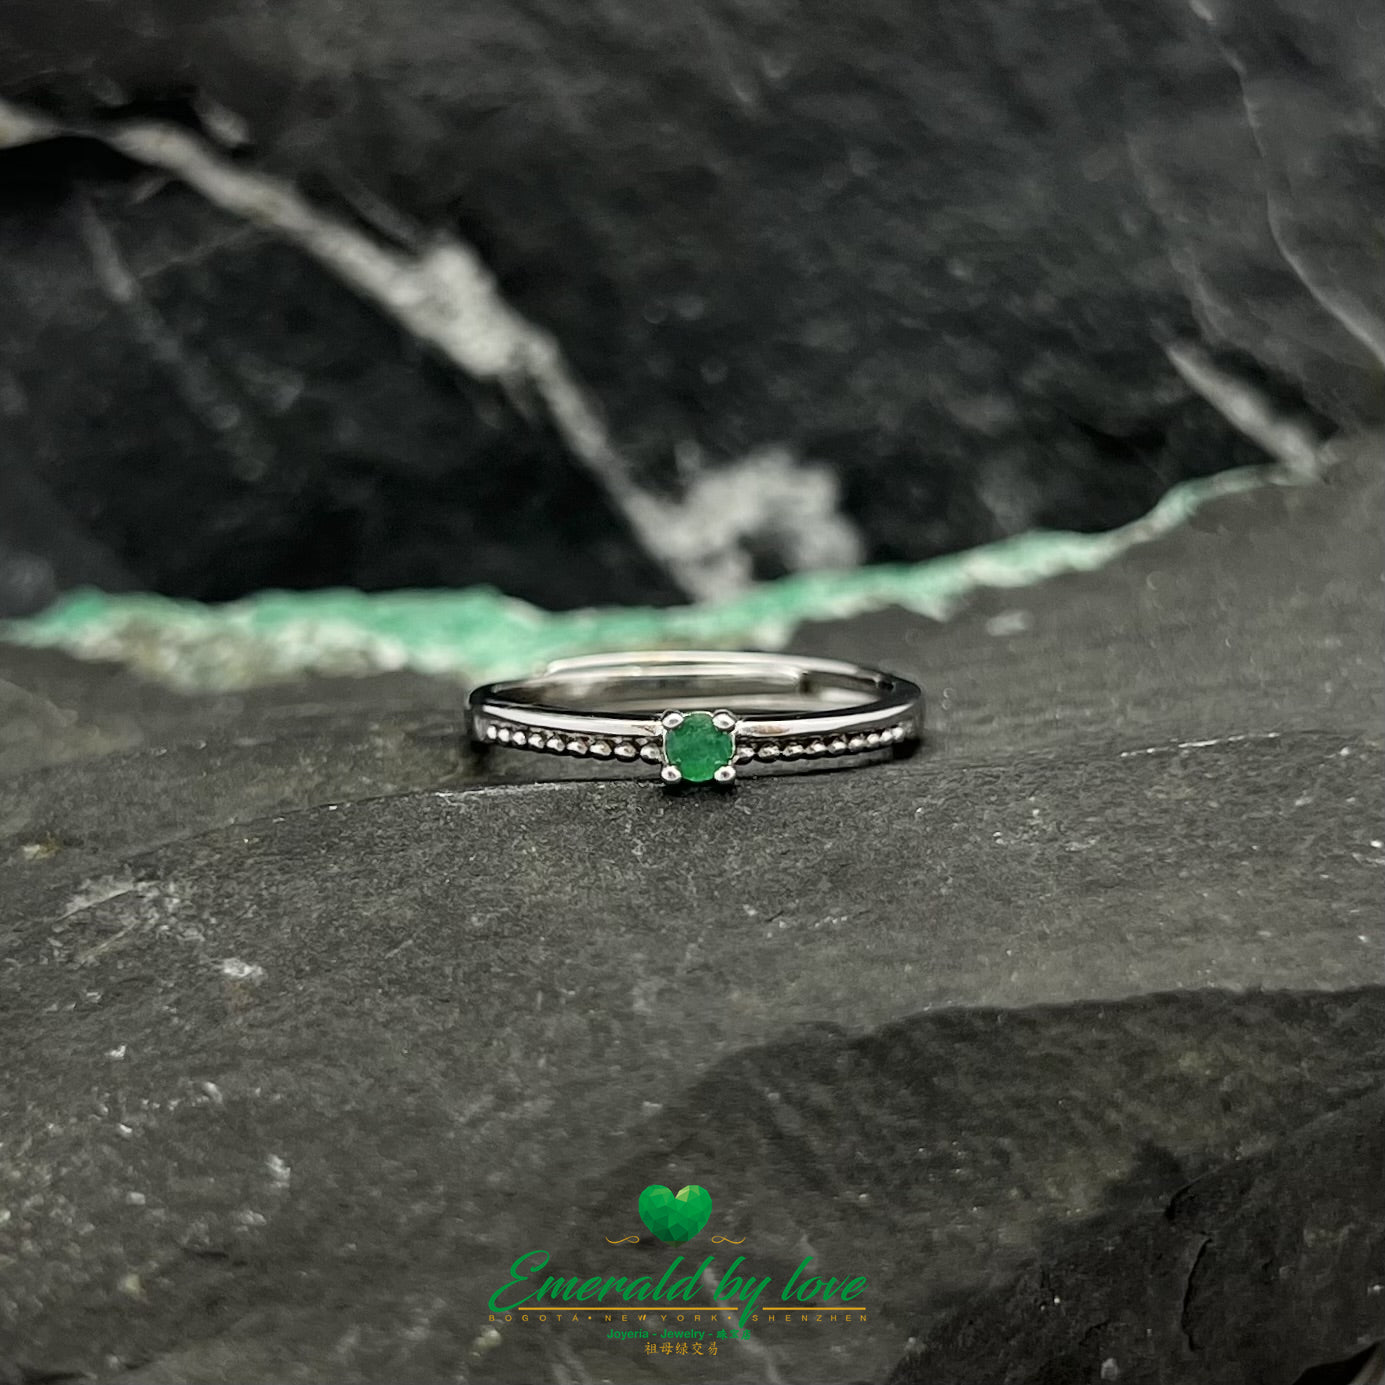 Sterling Silver Ring with Circular Details and Central Emerald Stone